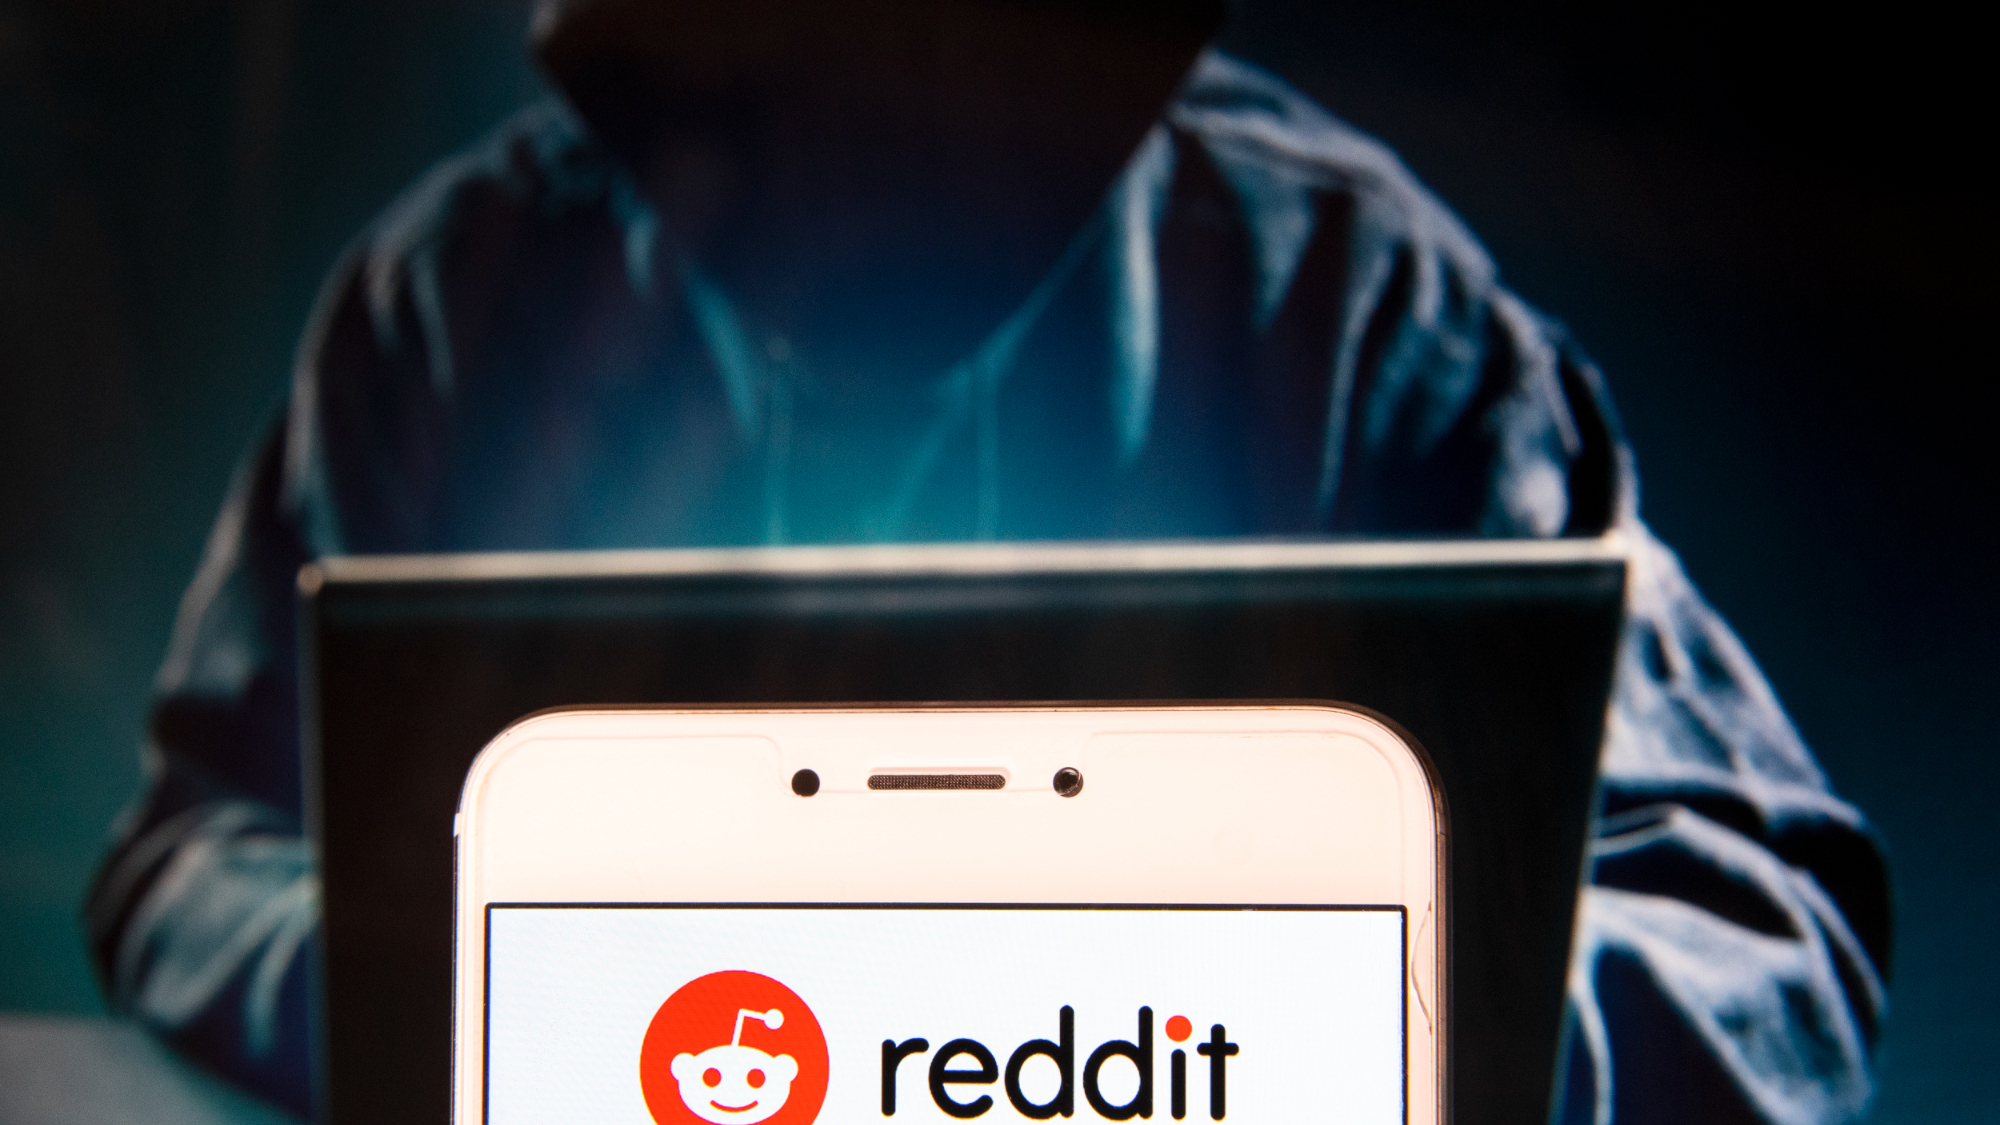  Reddit gets hacked after employee falls victim to phishing attack 